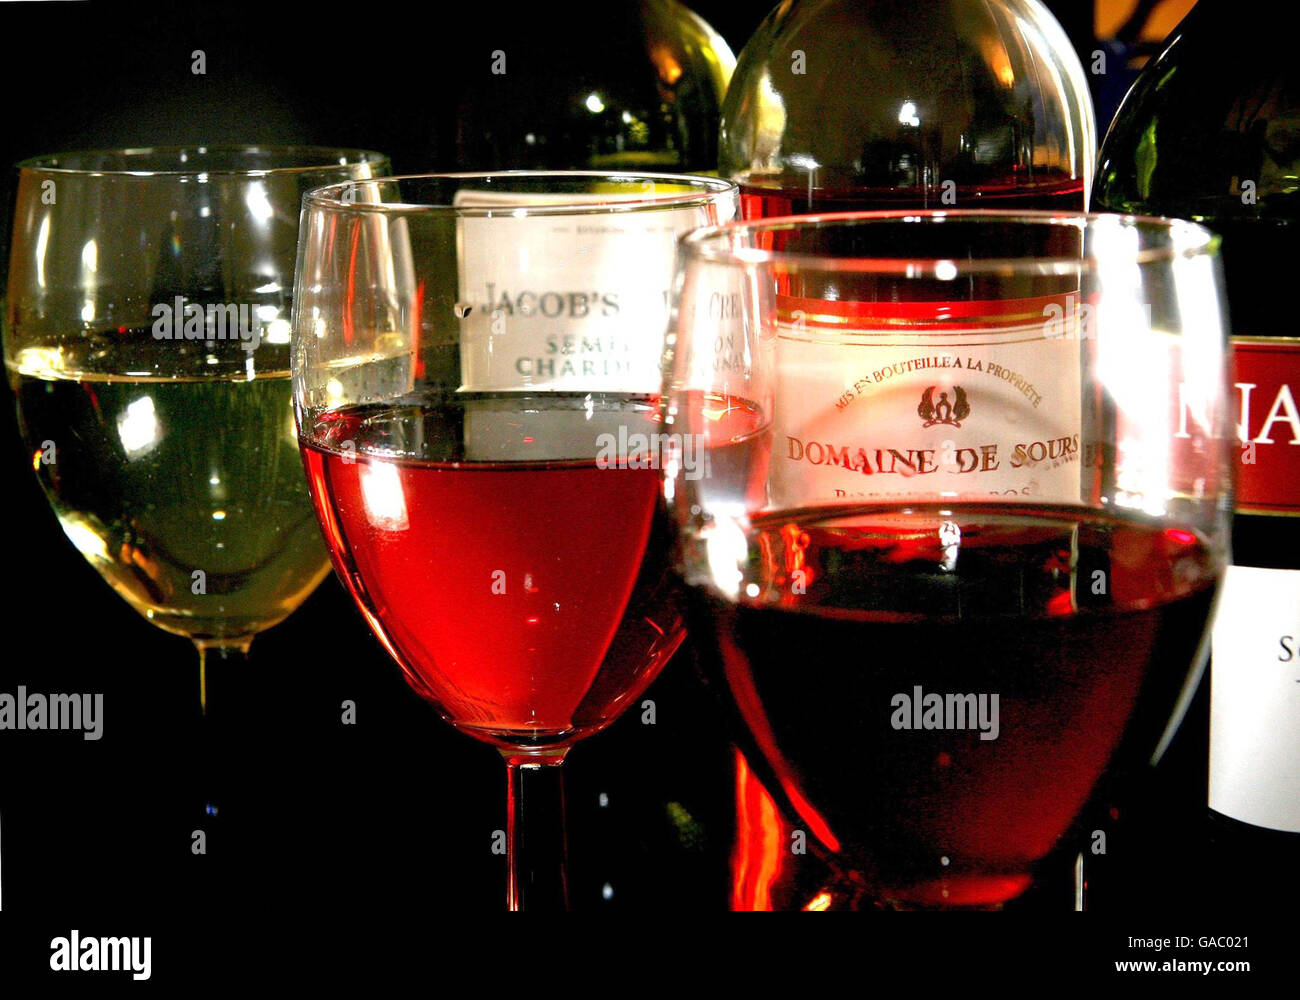 Generic image of wine filled glasses. Experts have warned of the dangers of routine over-consumption of alcohol as new figures were published showing people in relatively affluent areas are more likely to be drinking at levels considered 'hazardous' to health. Stock Photo